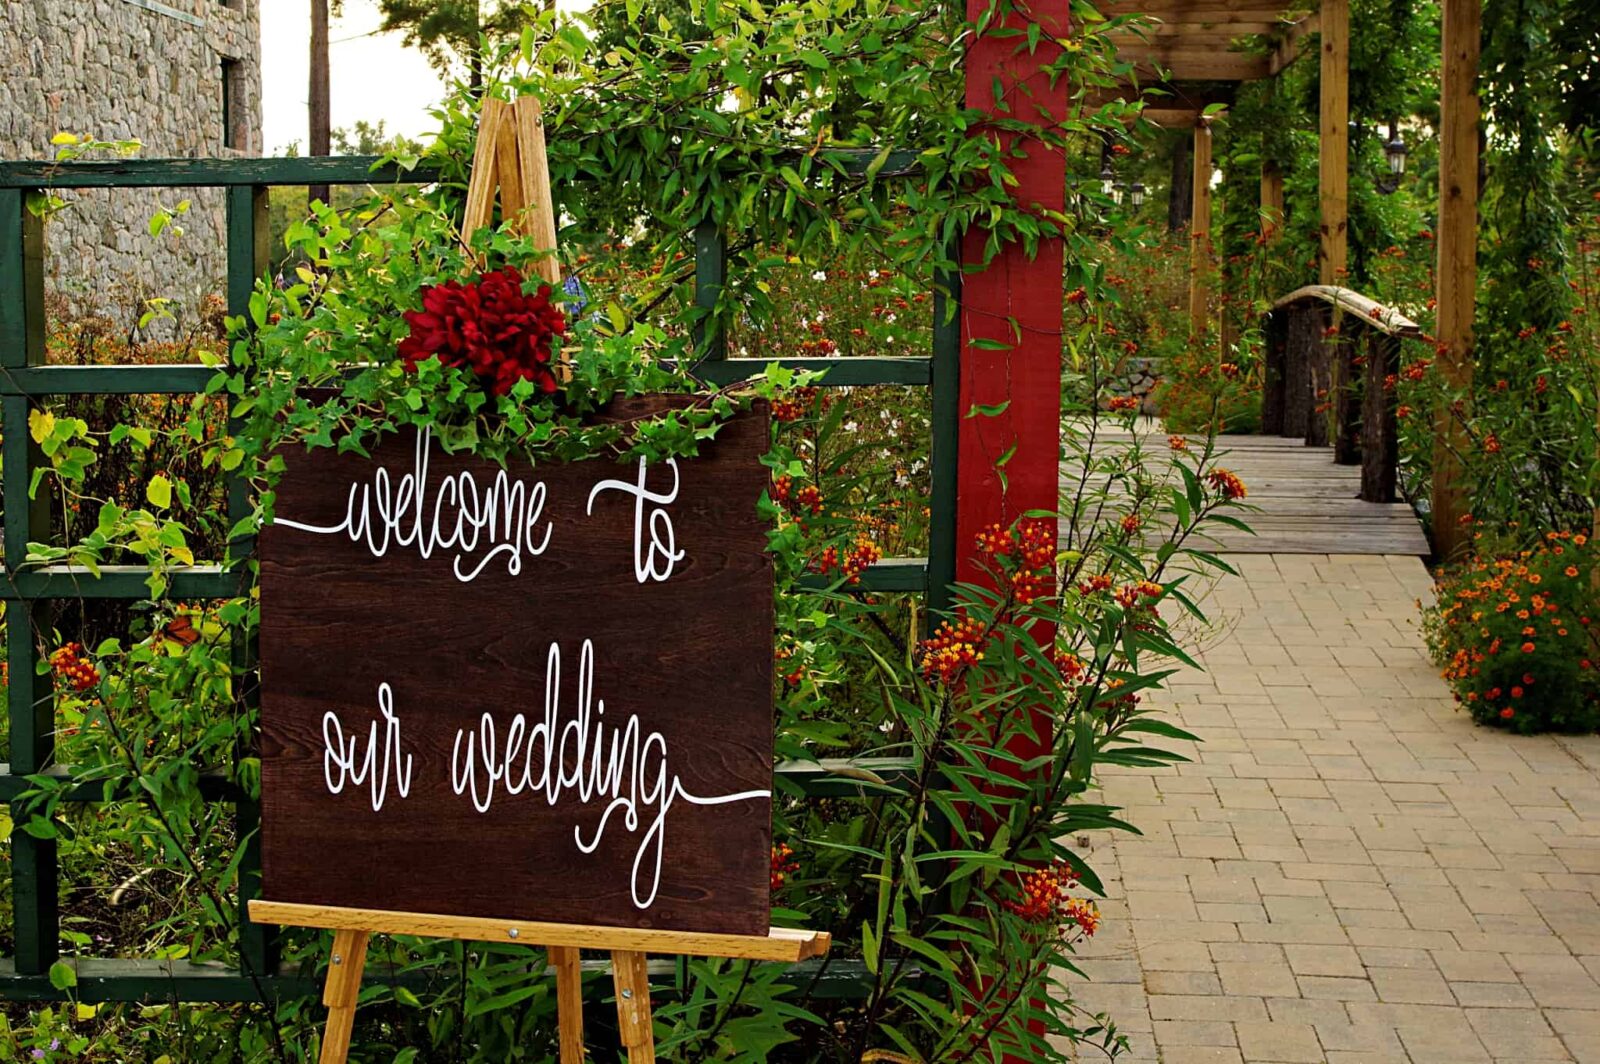 A sign that says " welcome to our wedding ".